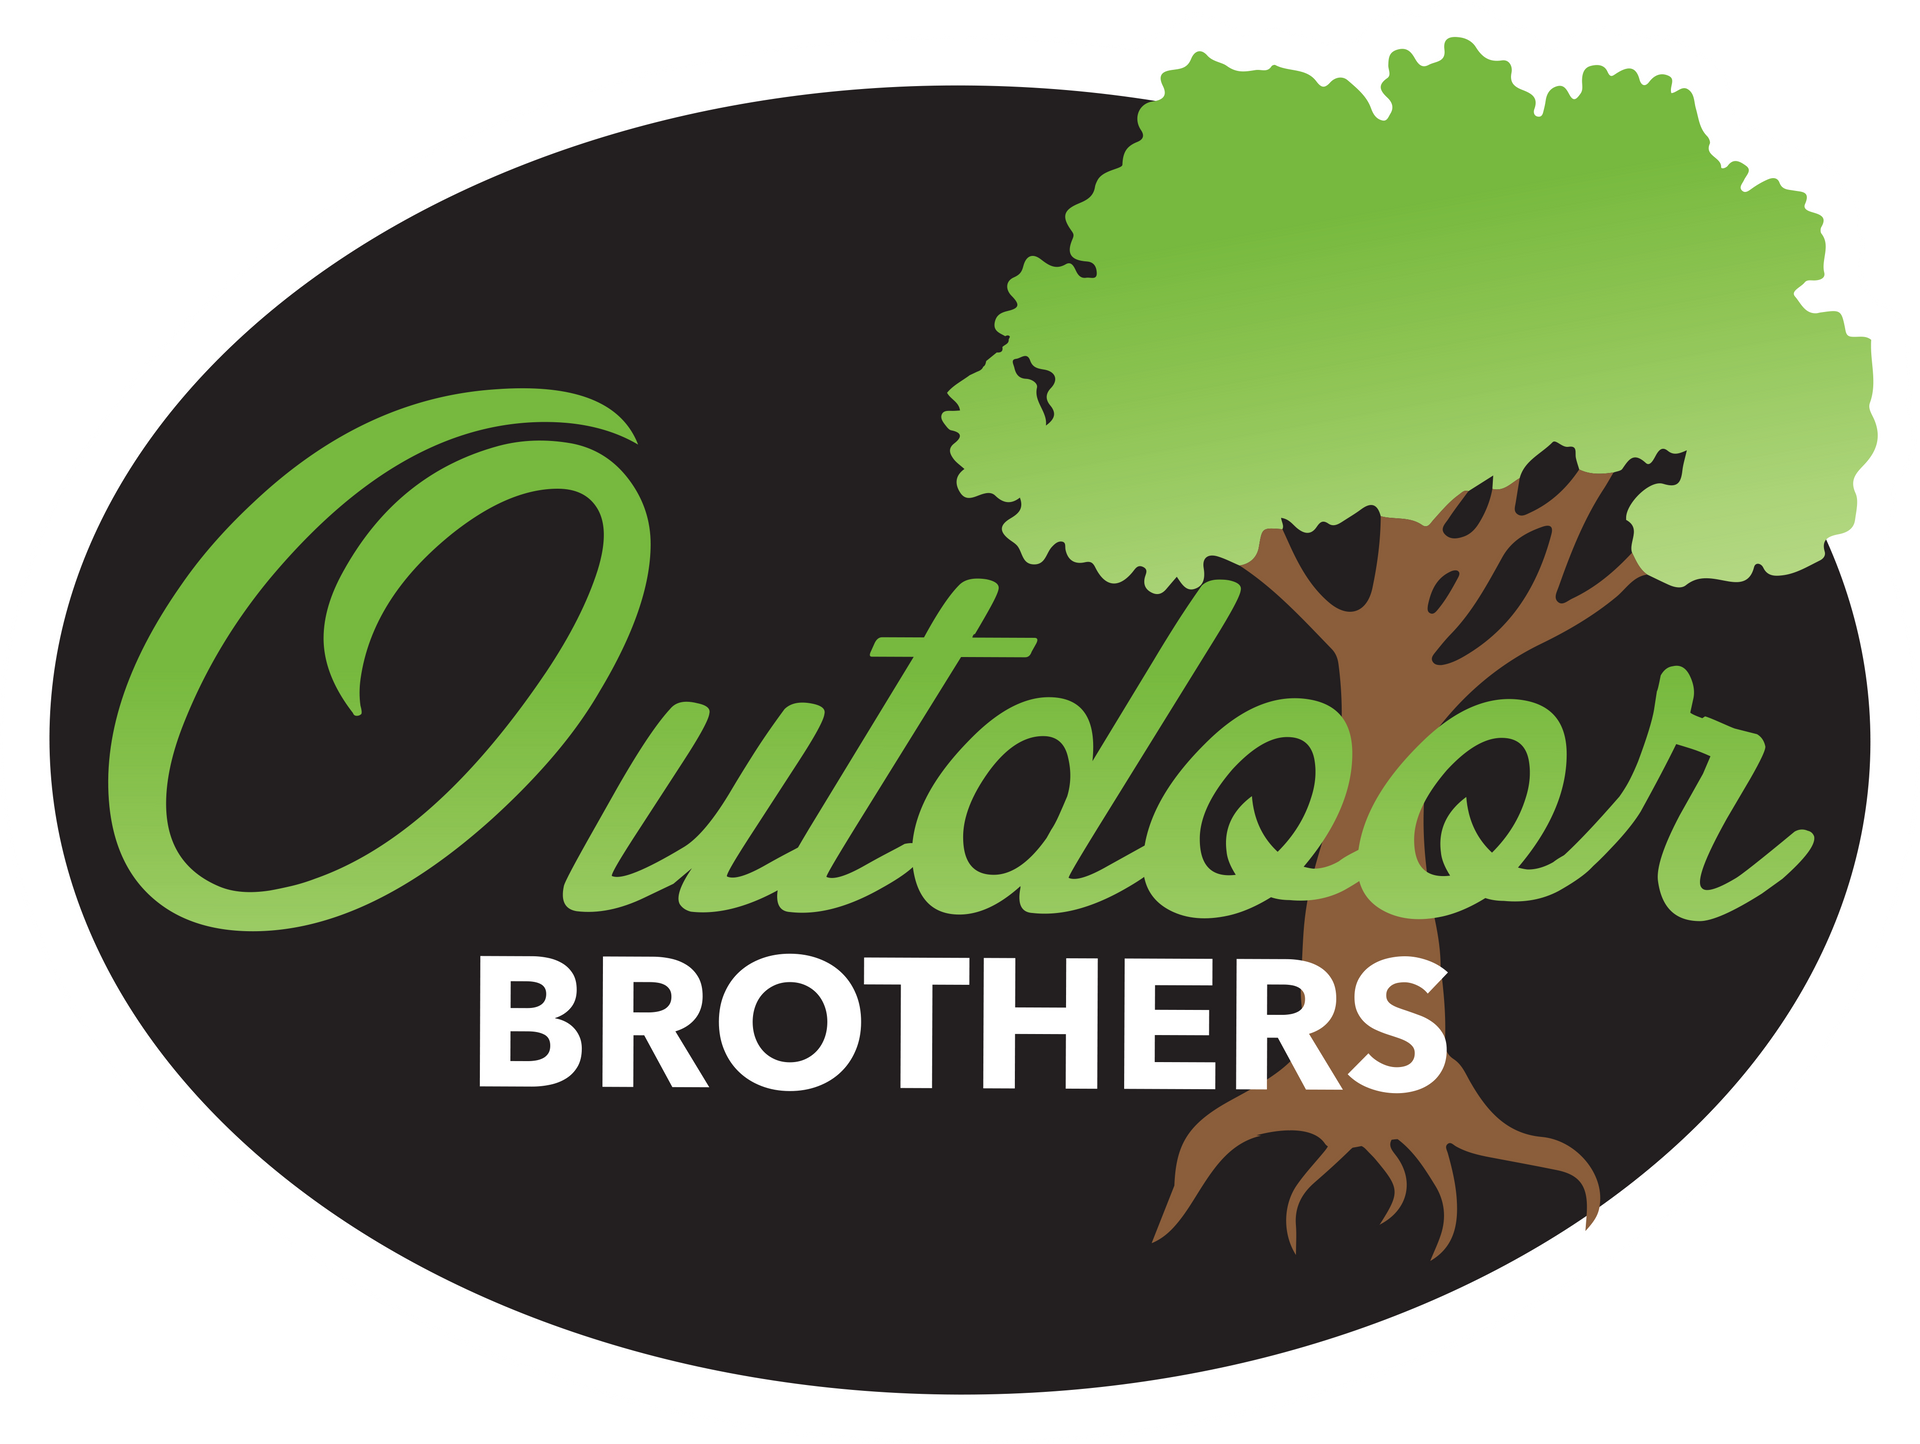 Outdoor Brothers